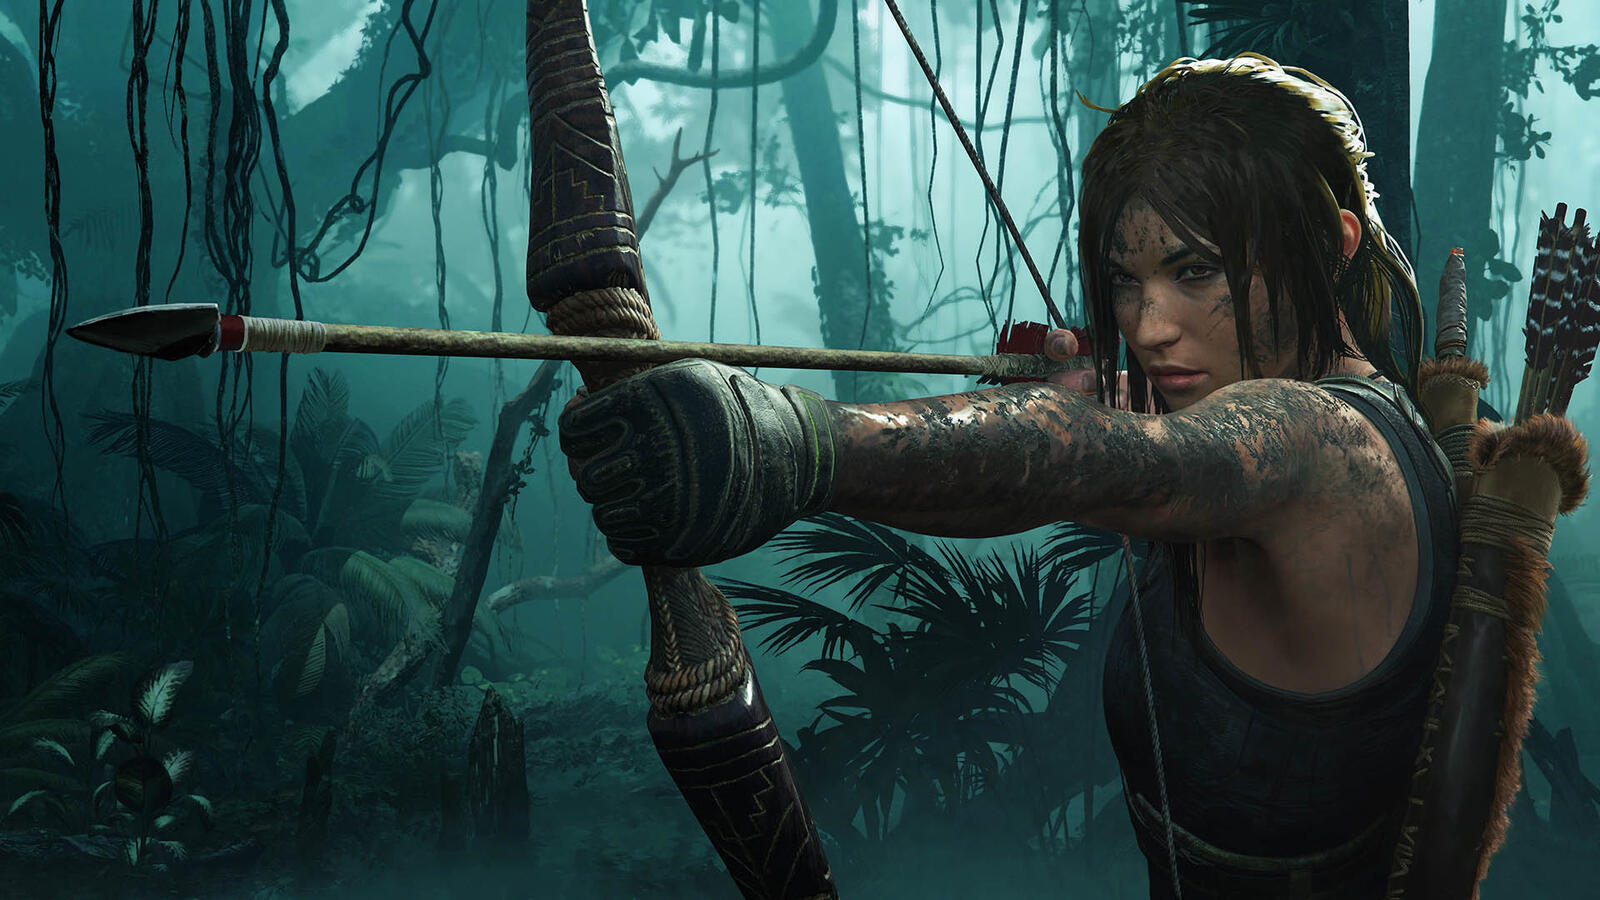 Wallpapers games Lara Croft shadow of the tomb raider on the desktop